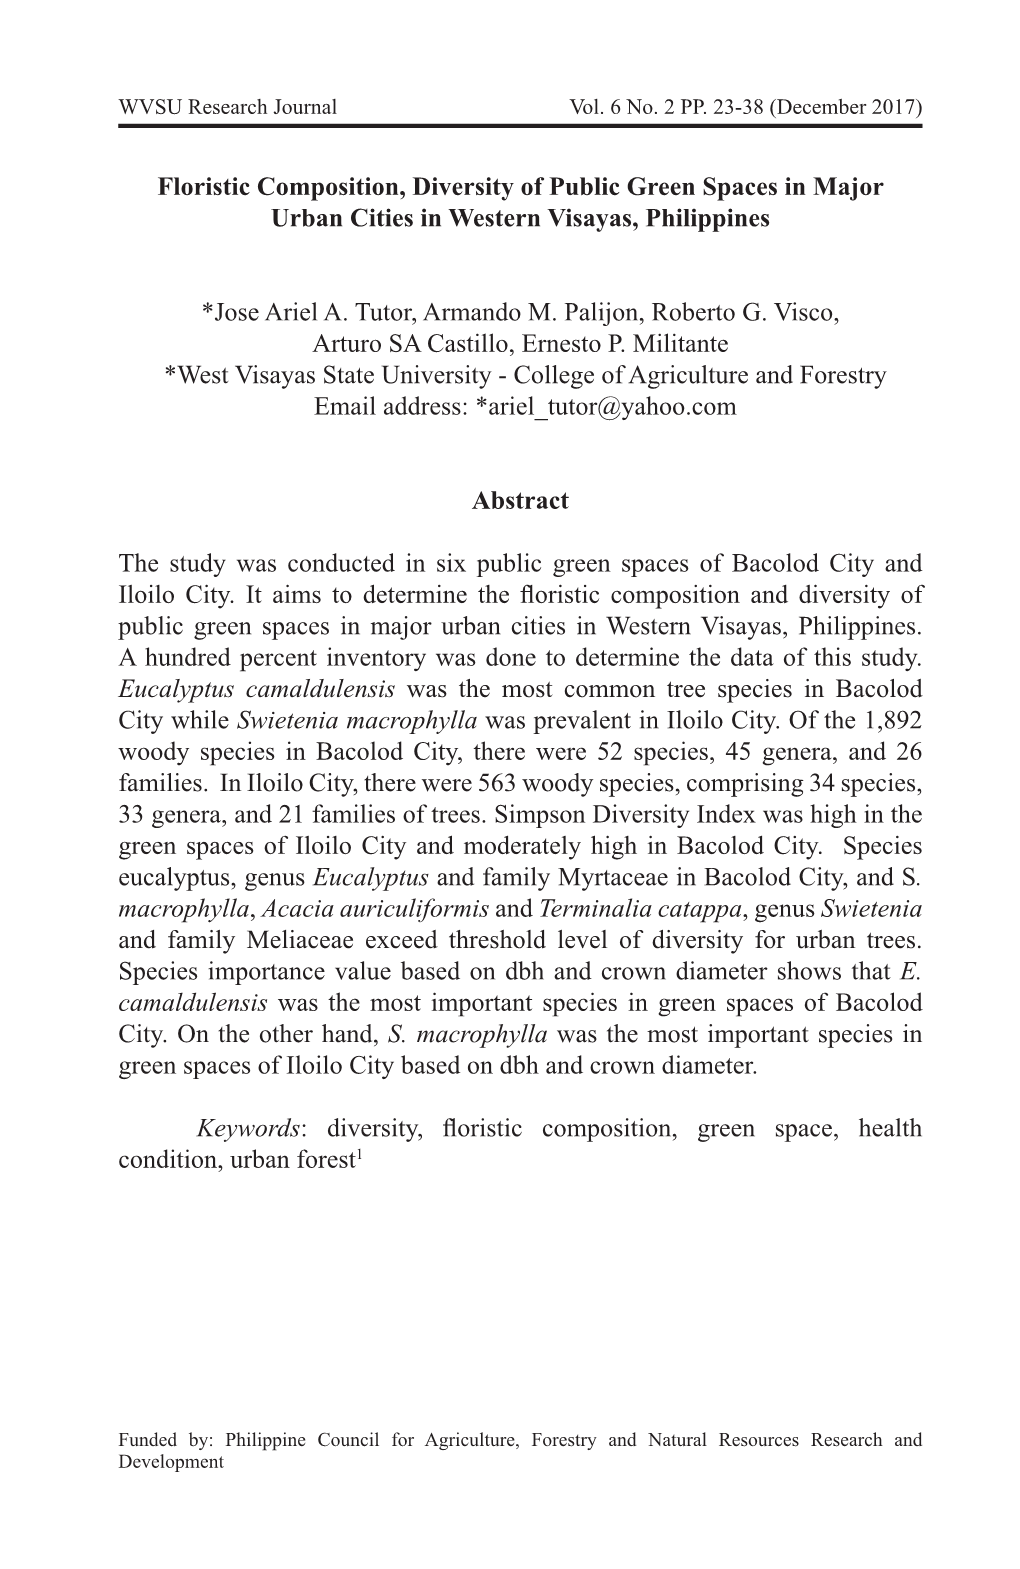 Floristic Composition, Diversity of Public Green Spaces in Major Urban Cities in Western Visayas, Philippines